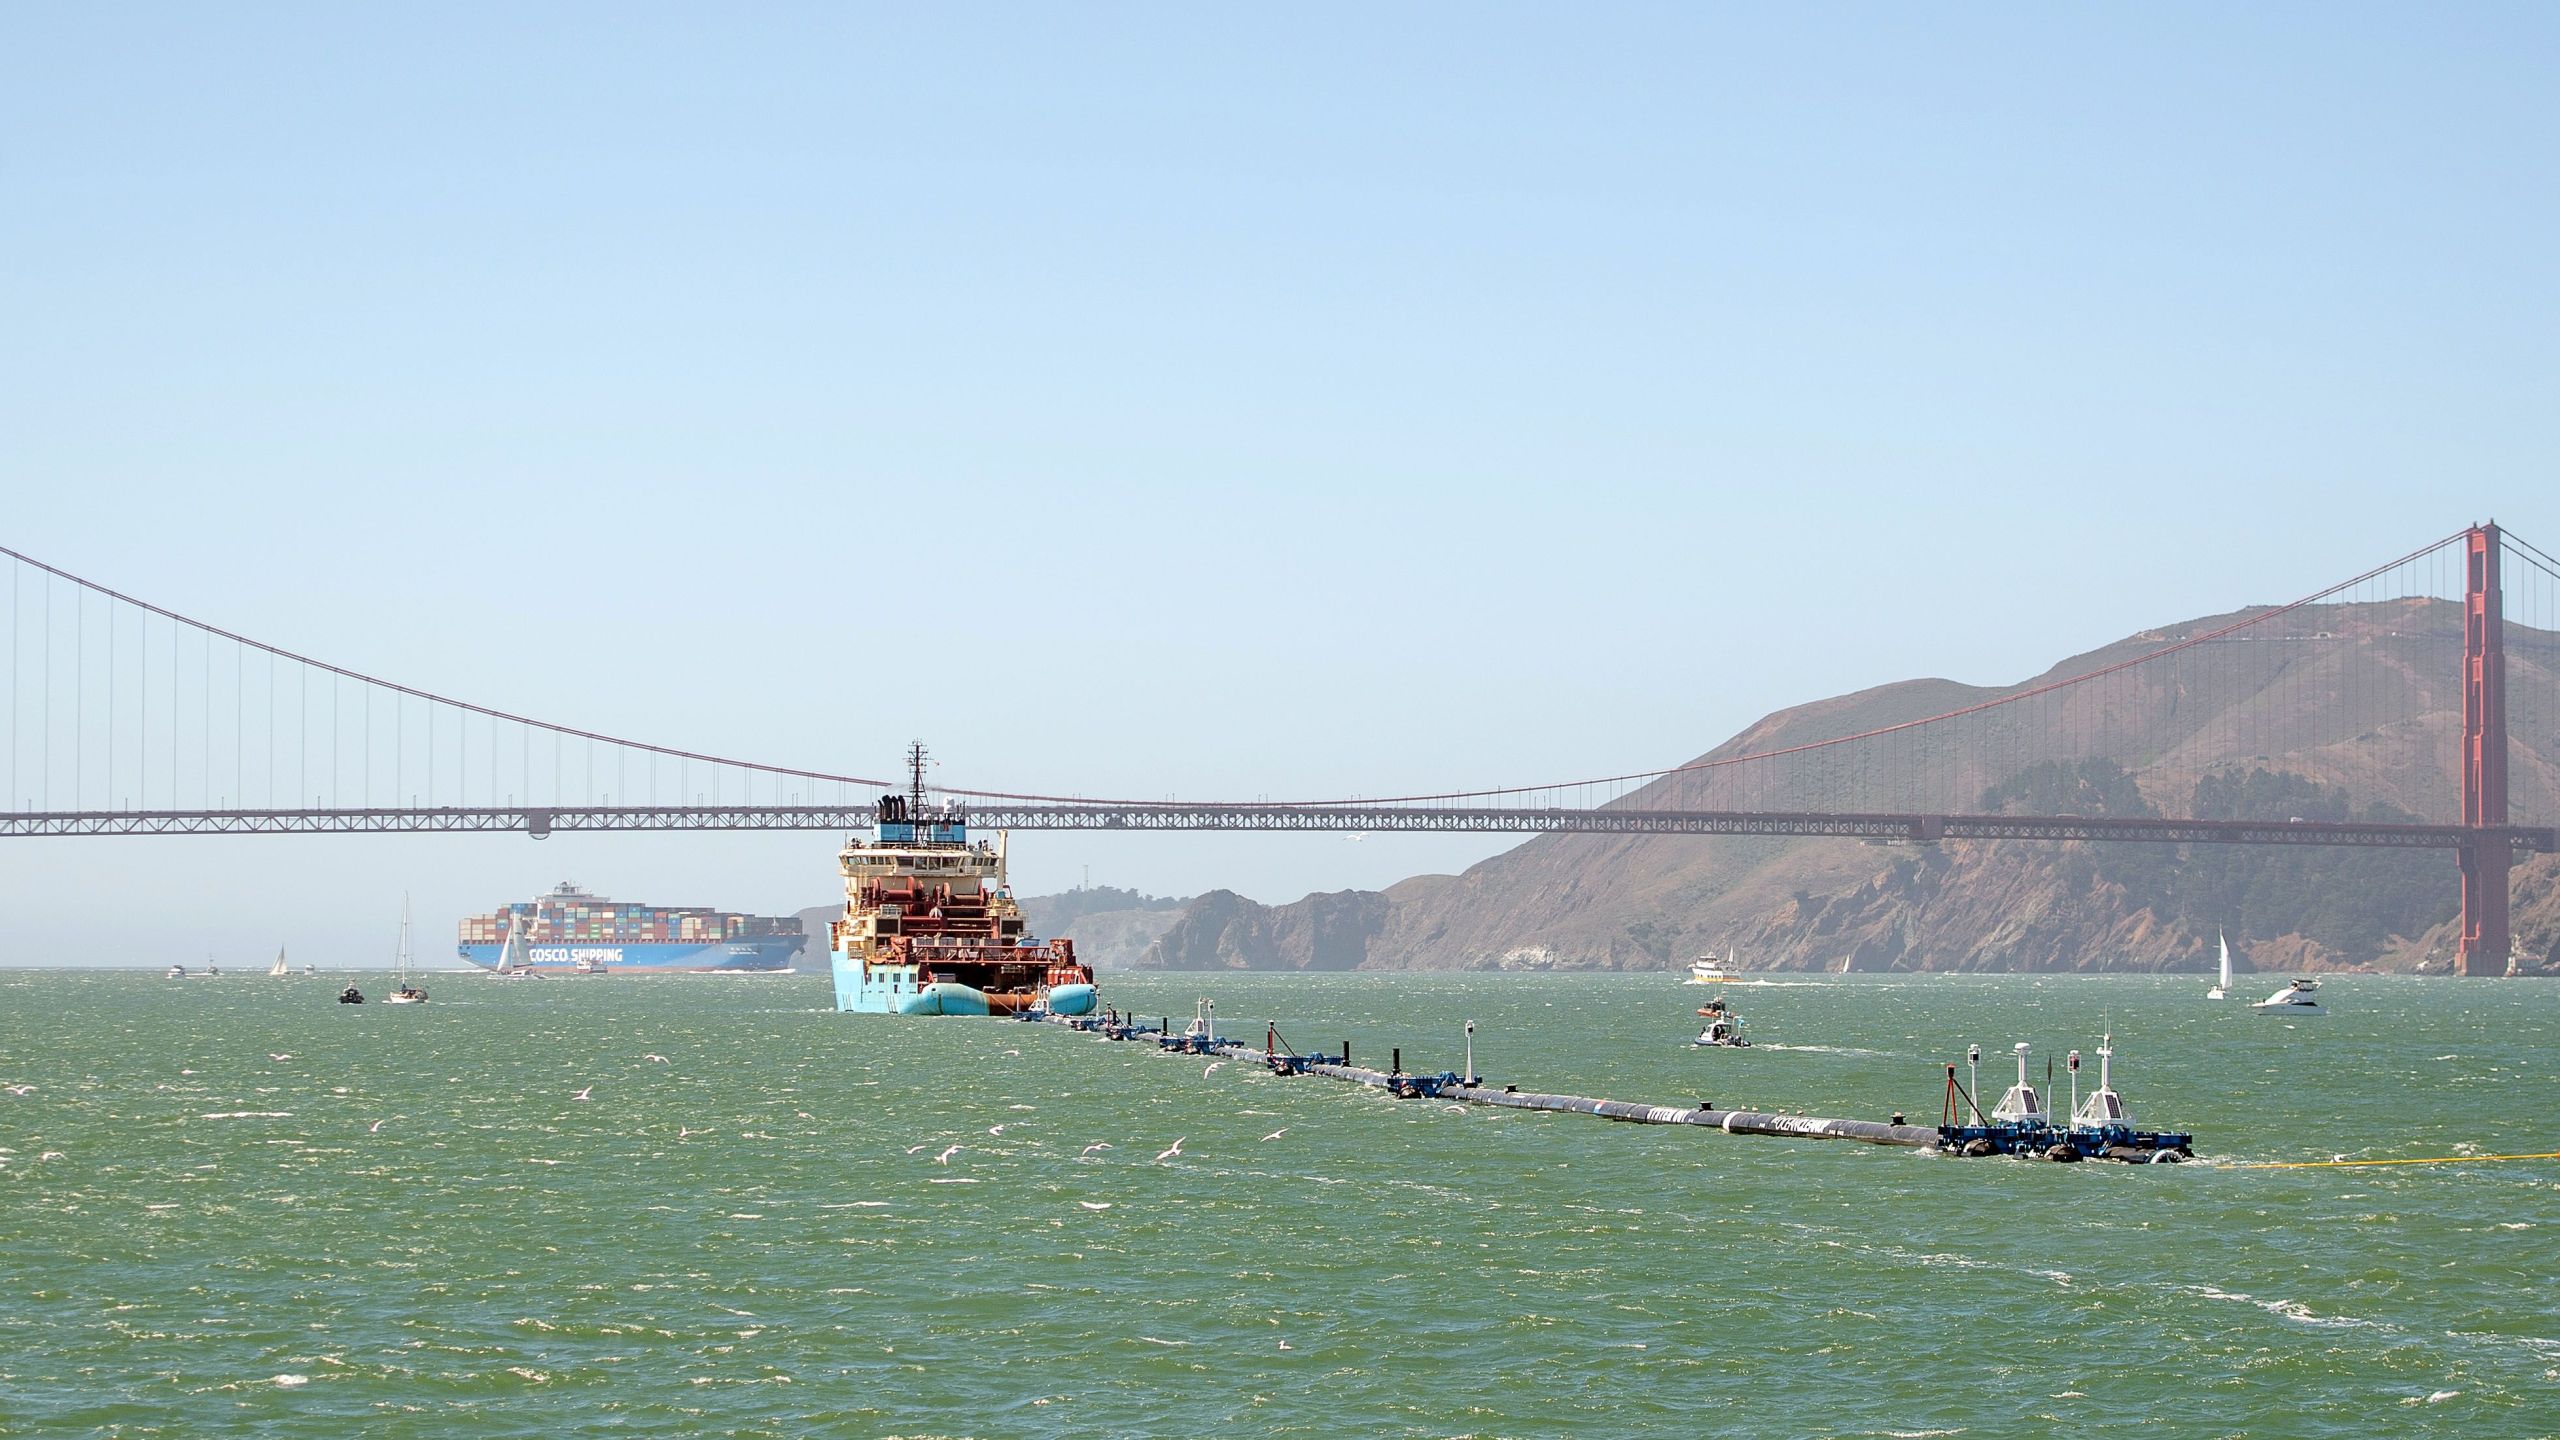 Ocean Cleanup's System 001 is towed out of the San Francisco Bay on Sept. 8, 2018. (Credit: Josh Edelson / AFP / Getty Images)